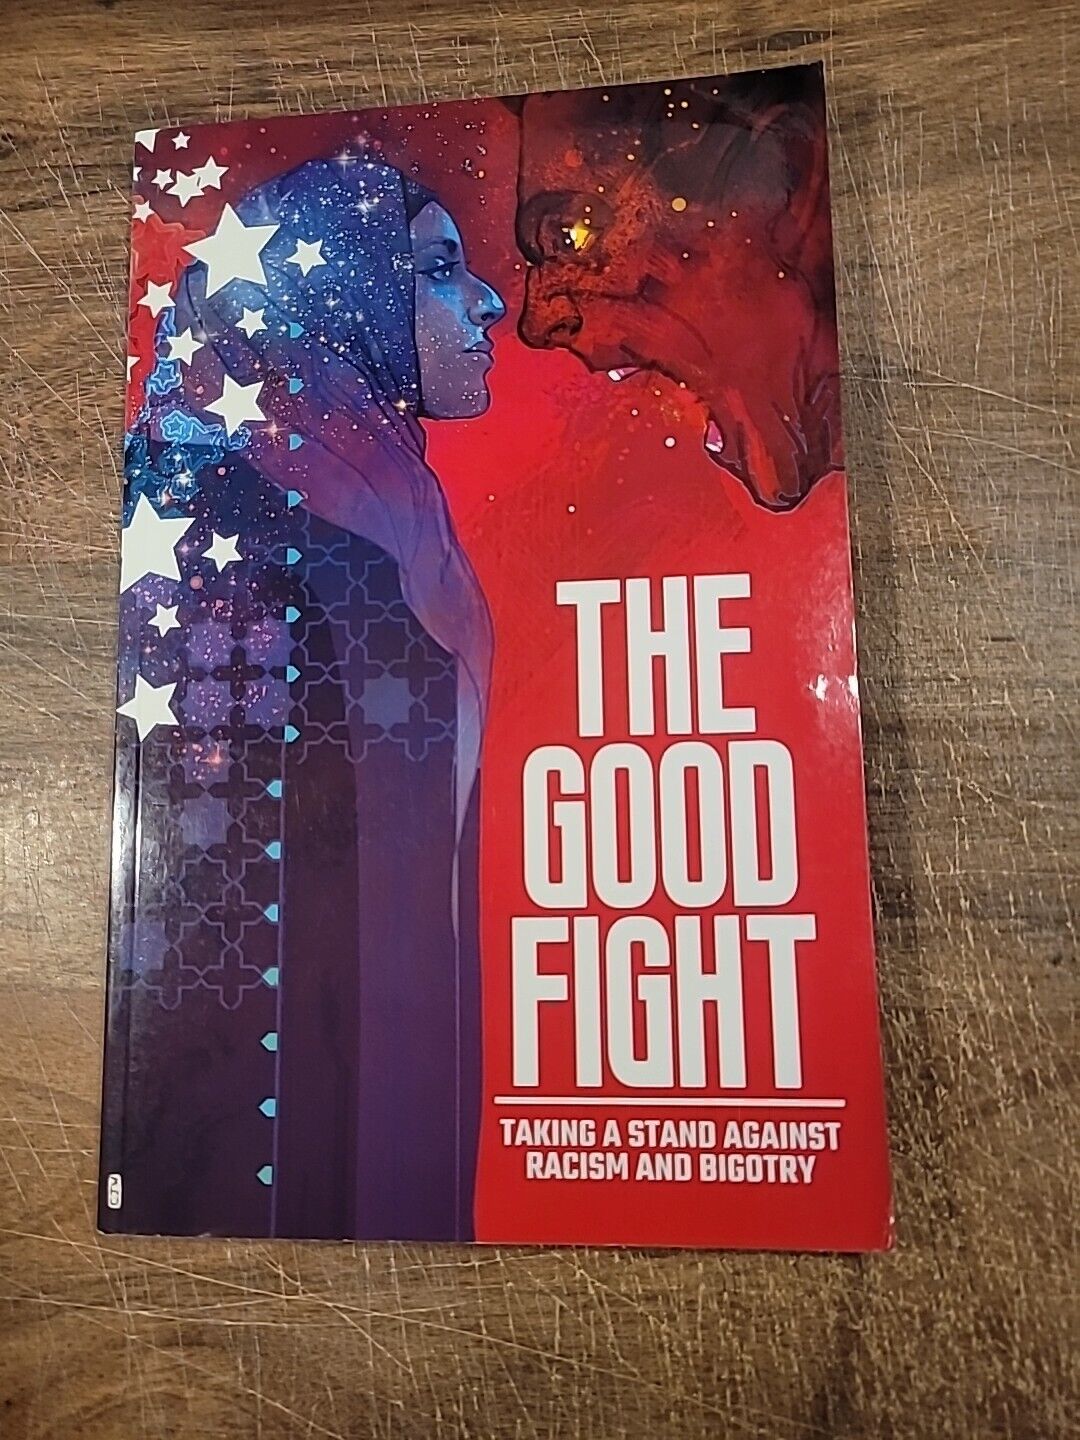 The Good Fight: Taking A Stand Against Racism and Bigotry